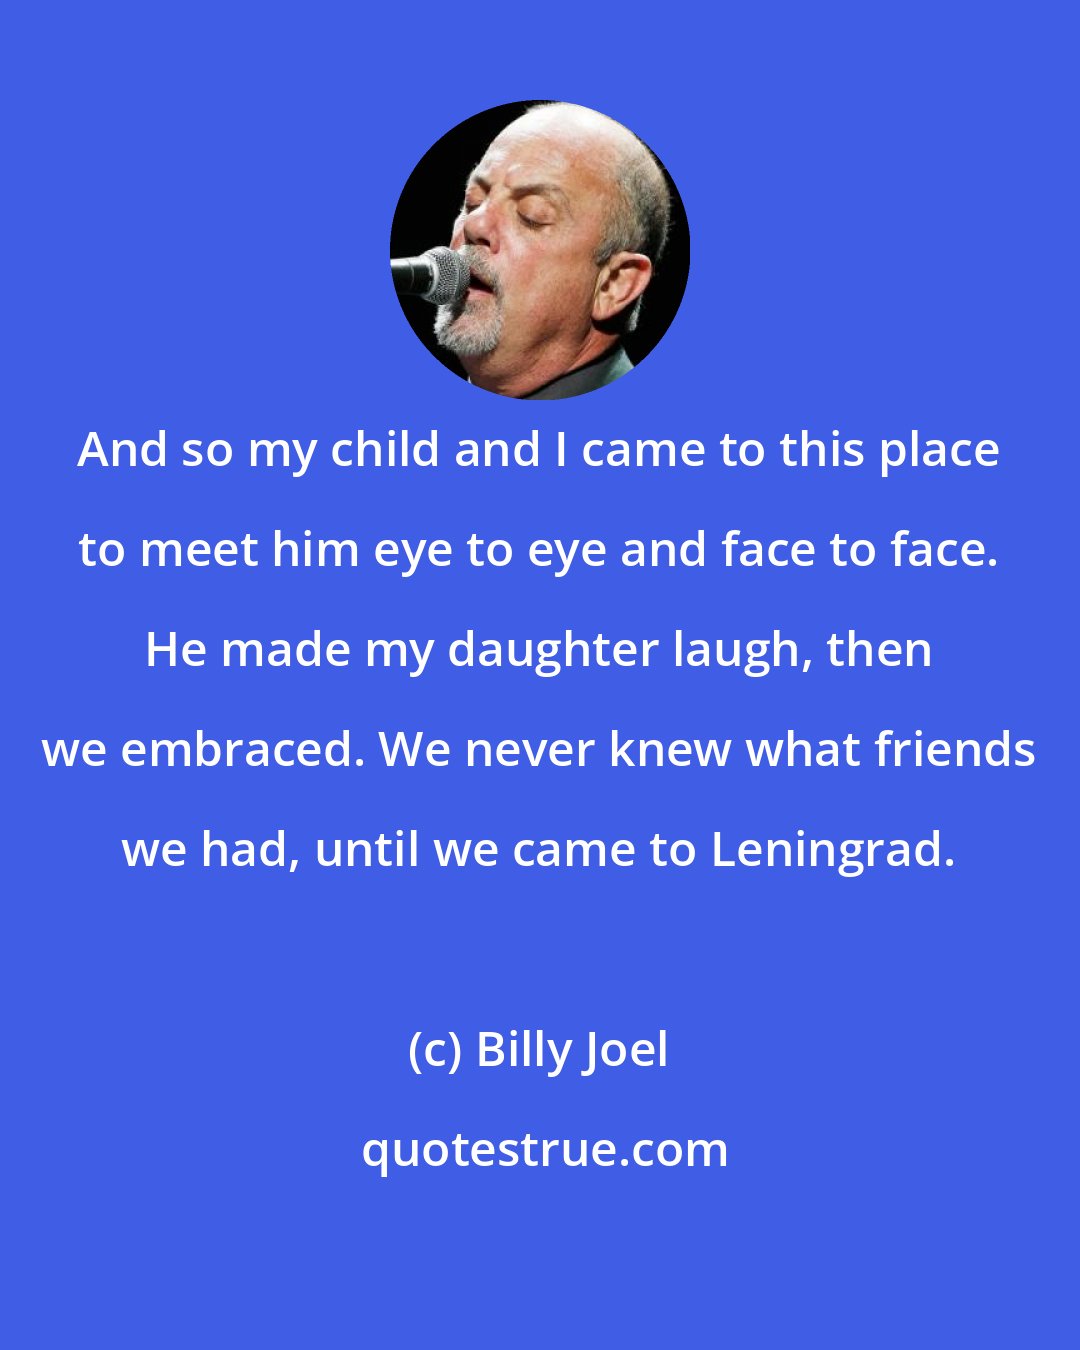 Billy Joel: And so my child and I came to this place to meet him eye to eye and face to face. He made my daughter laugh, then we embraced. We never knew what friends we had, until we came to Leningrad.